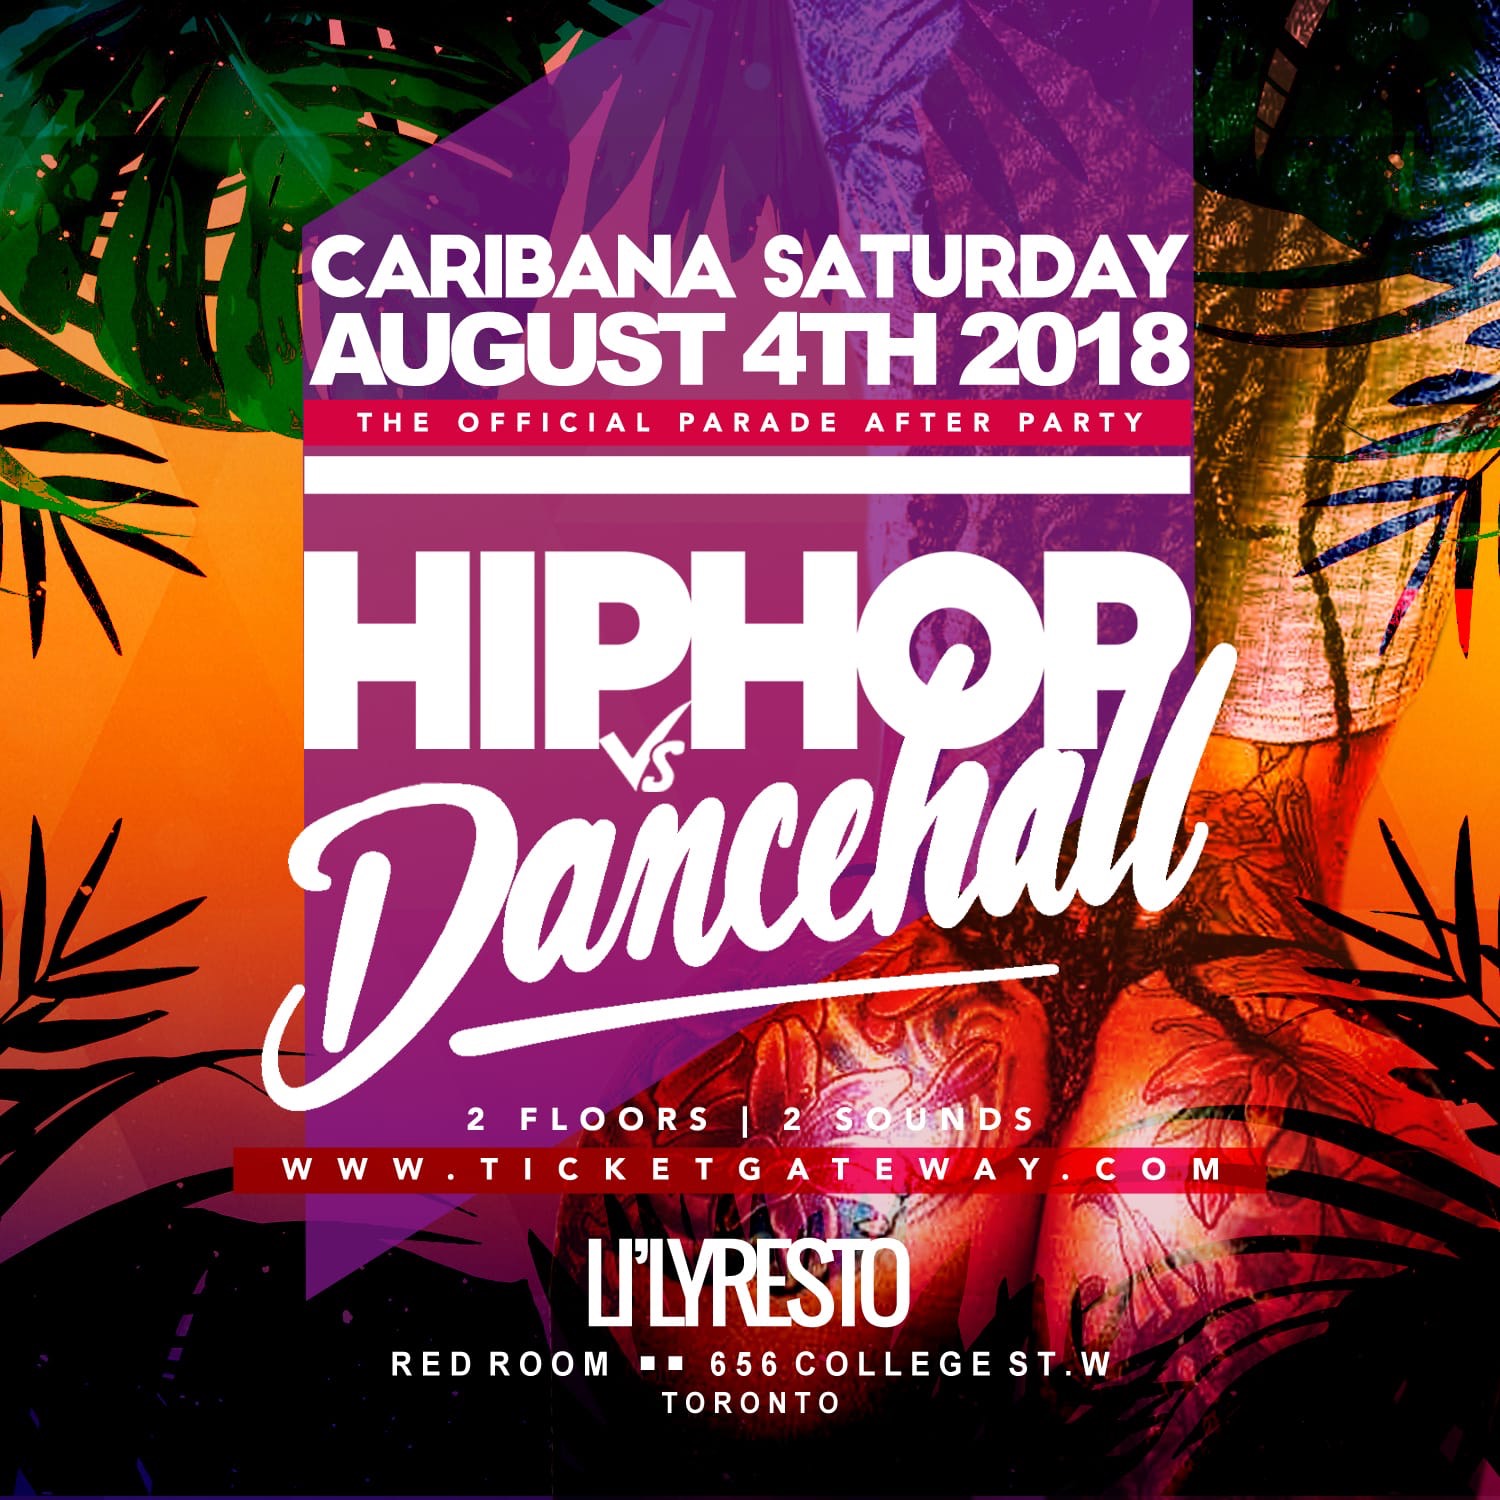 Hiphop Vs Dancehall: Caribana Saturday Afterparty | Aug 4th 2018